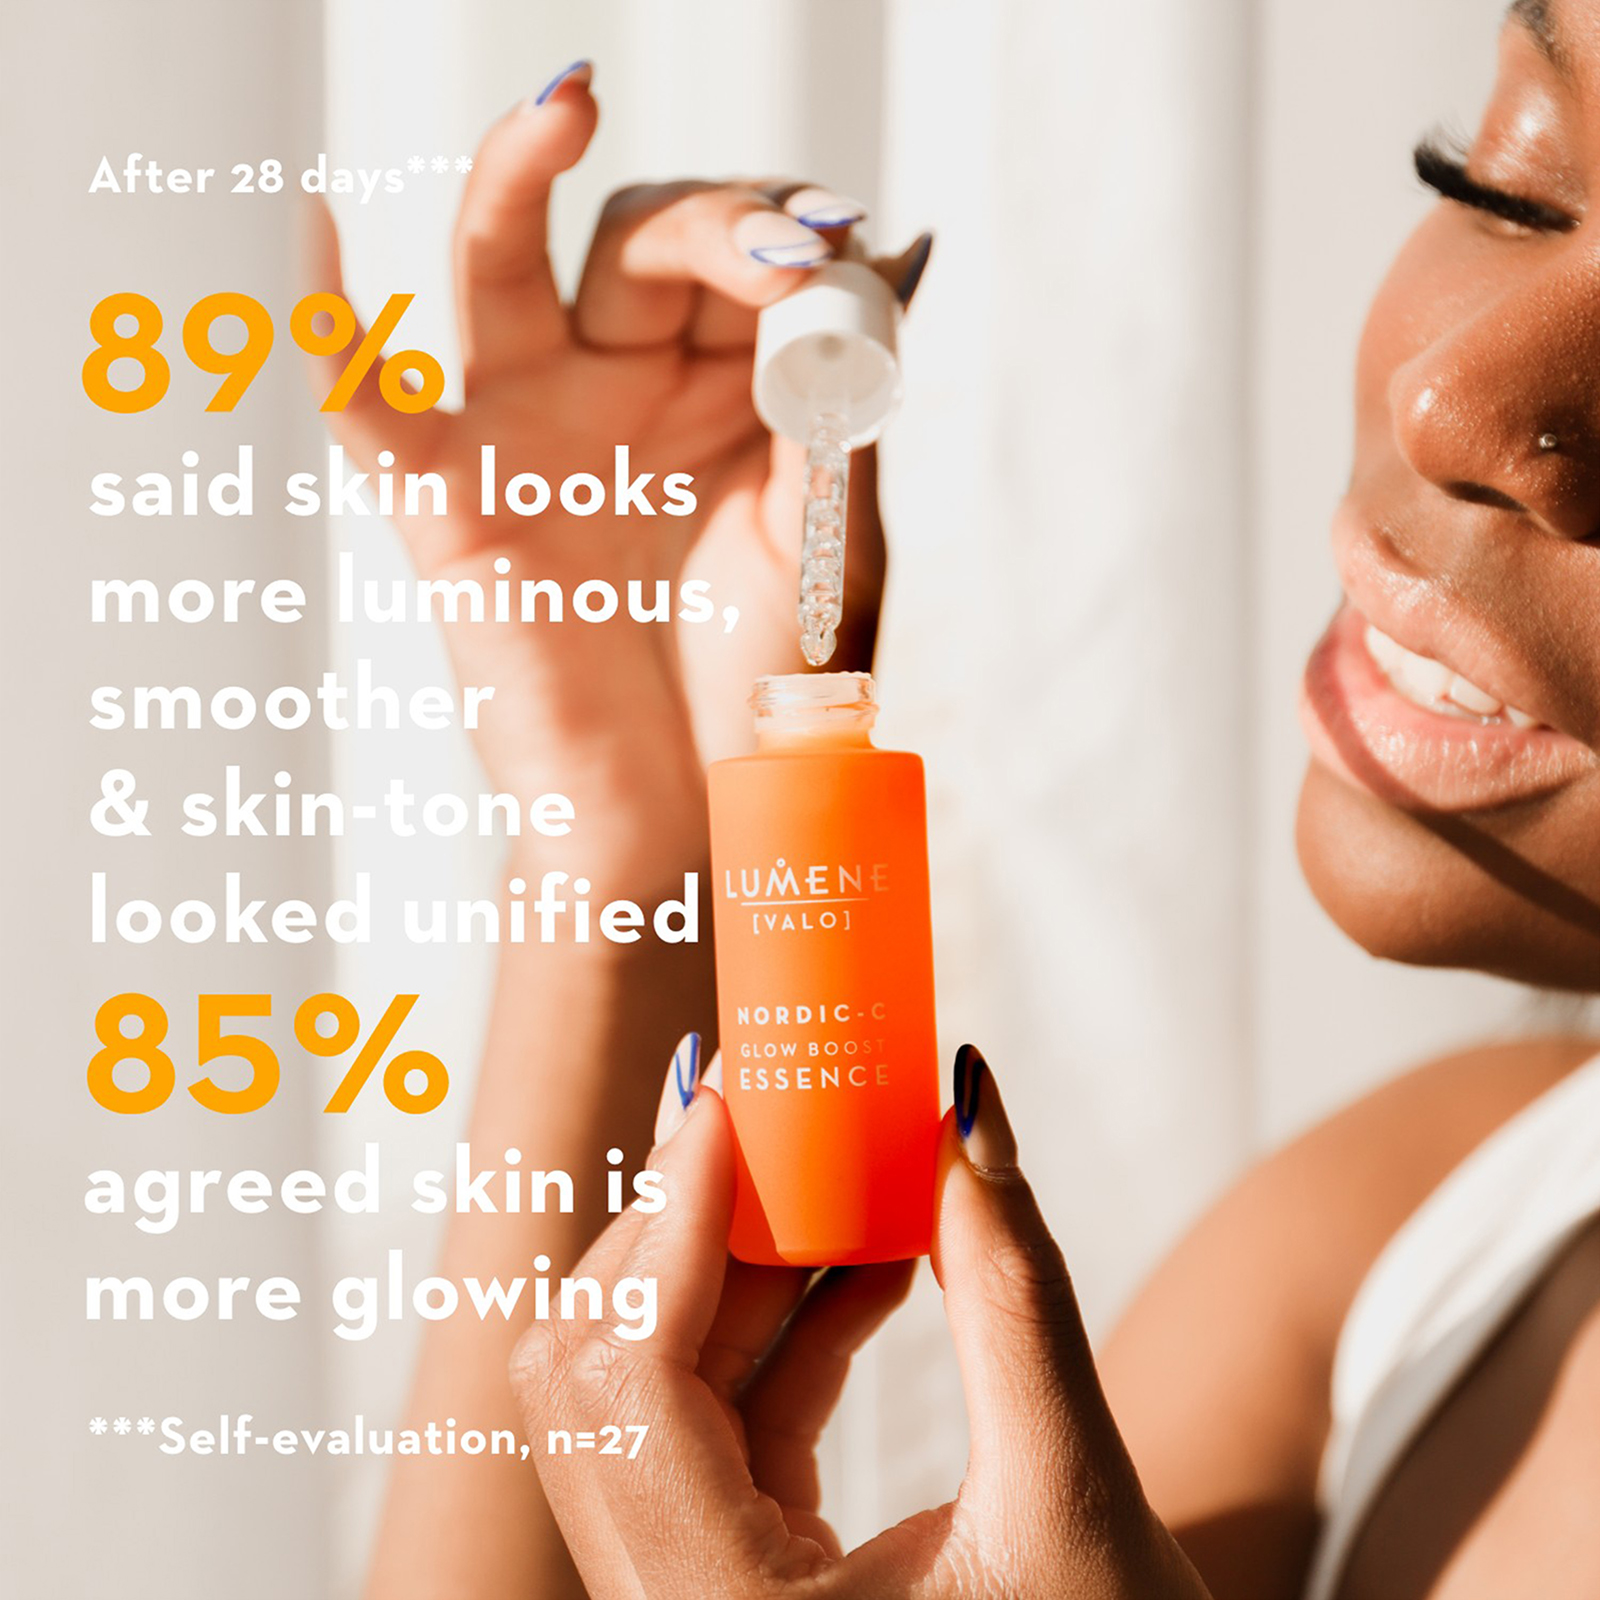 After 28 days 89% said skin looks more luminous, smoother & skin-tone looked unified UMENE 85% DE agreed skin is more glowing. LUMENE (VALO) NORDIC-C GLOW BOOST ESSENCE ***Self-evaluation, n=27